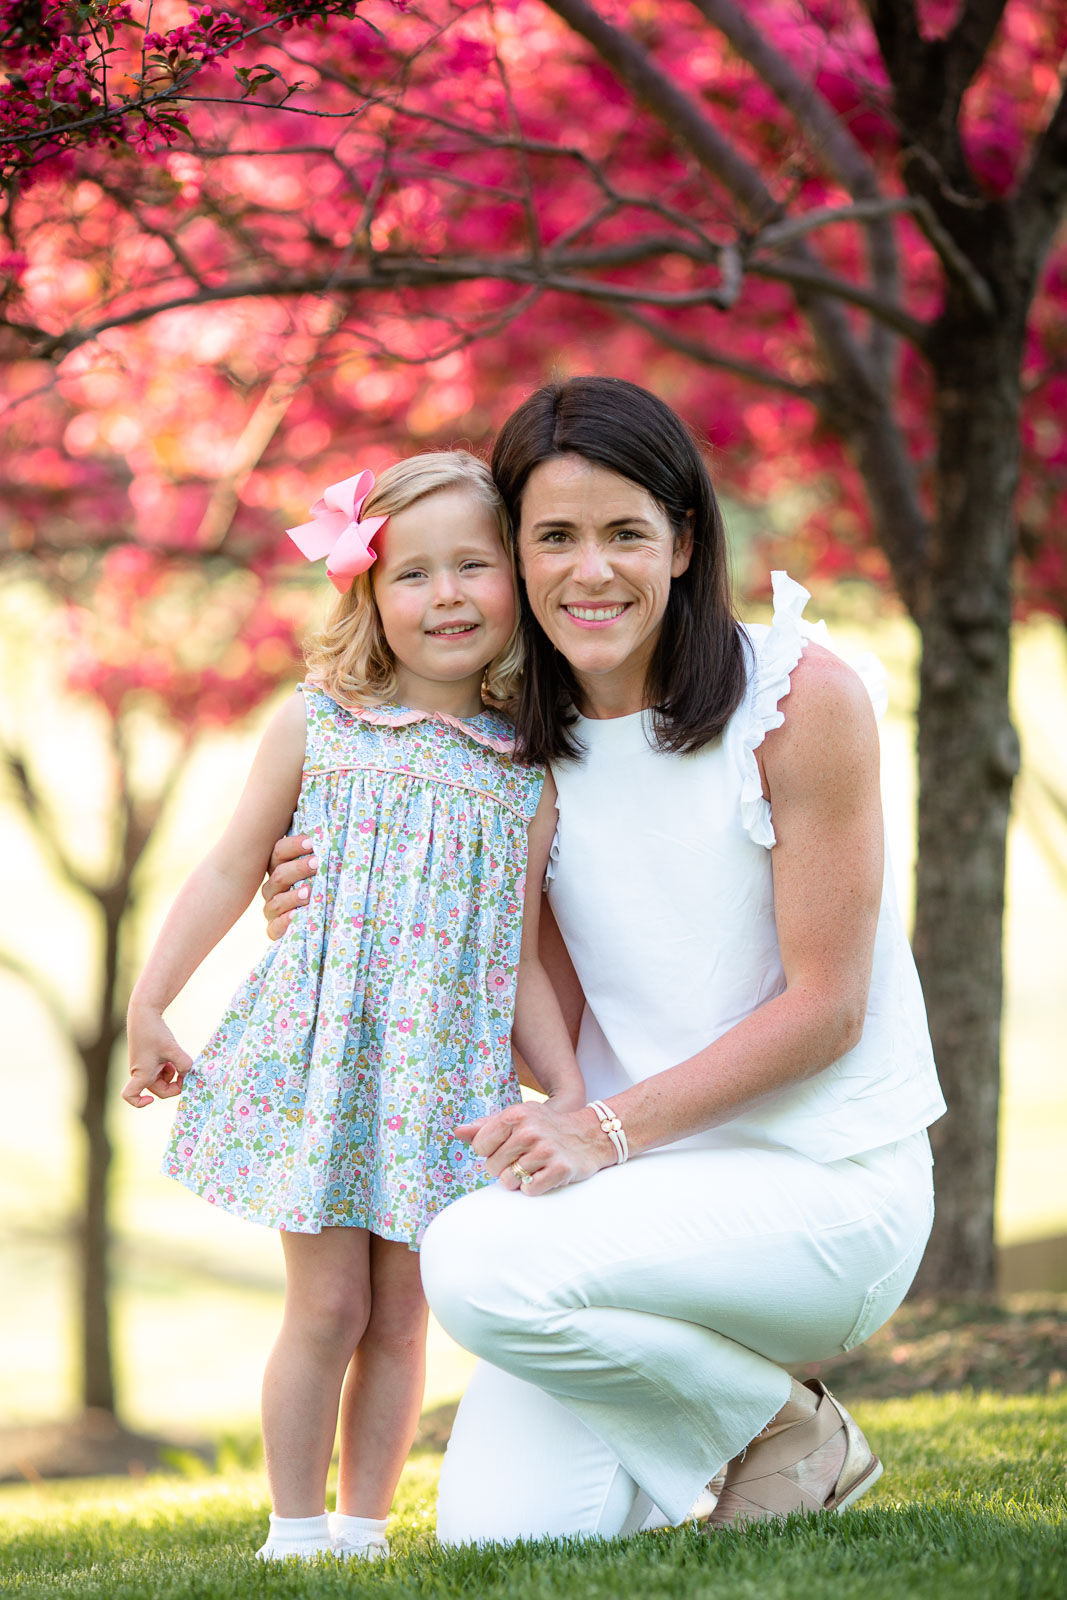 Stephanie Anne Photography Chicago Family Photos in Grant Park's Spring Flowering Trees